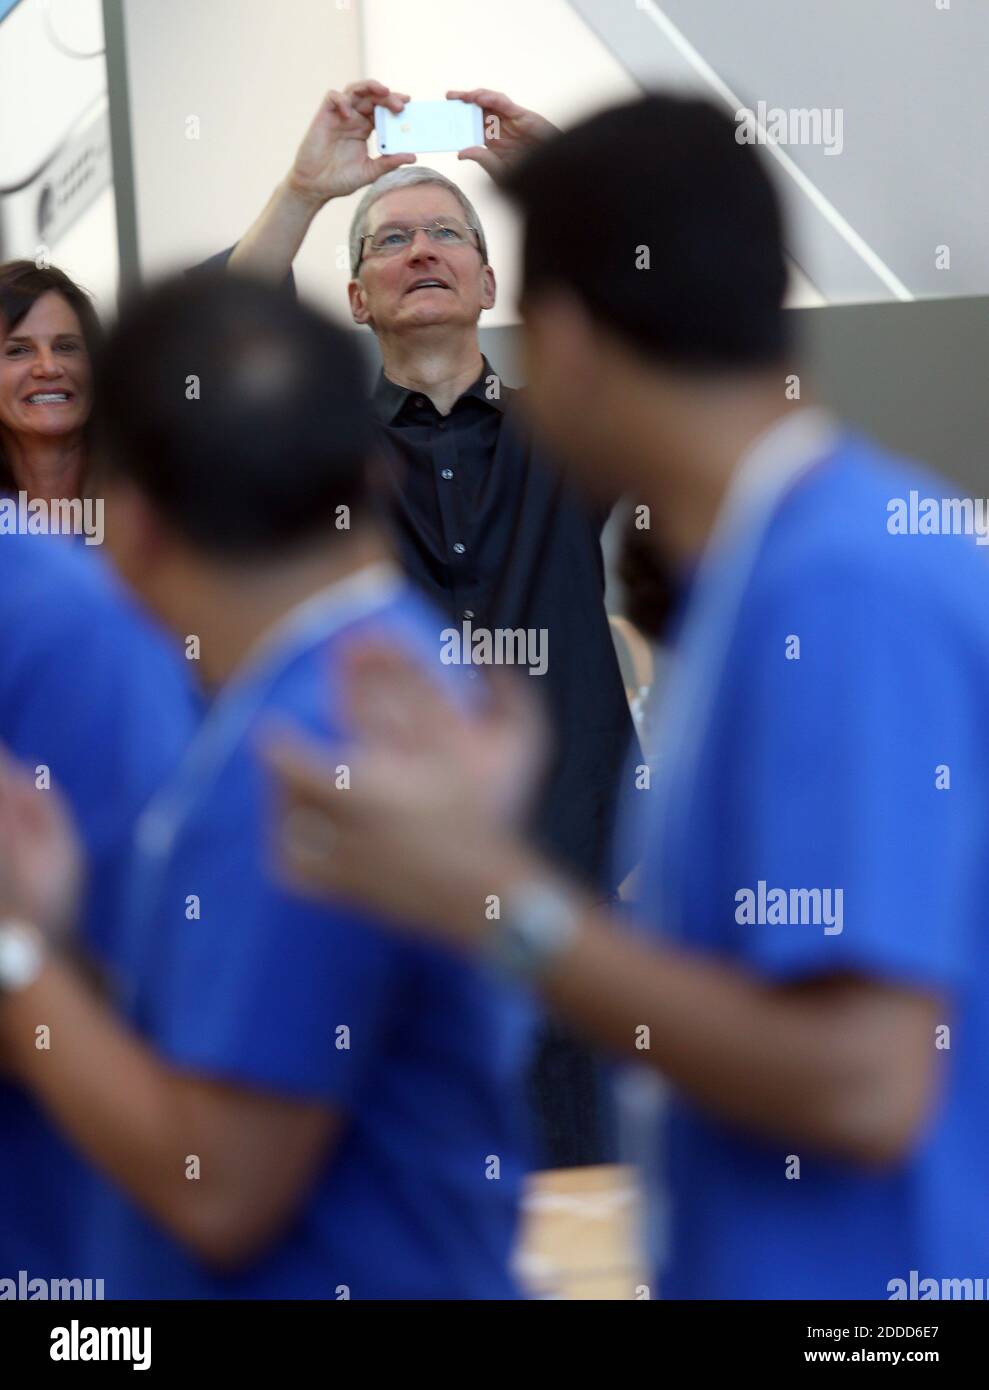 NO FILM, NO VIDEO, NO TV, NO DOCUMENTARY - Apple Chief Executive Officer Tim Cook takes pictures during the release of the new iPhone 5s and 5c at the Apple Store on University Avenue in Palo Alto, California, USA, Friday, Sept. 20, 2013. Customers lined up around the block to be some of the first to get their new phones. Photo by Jane Tyska/Bay Area News Group/MCT/ABACAPRESS.COM Stock Photo